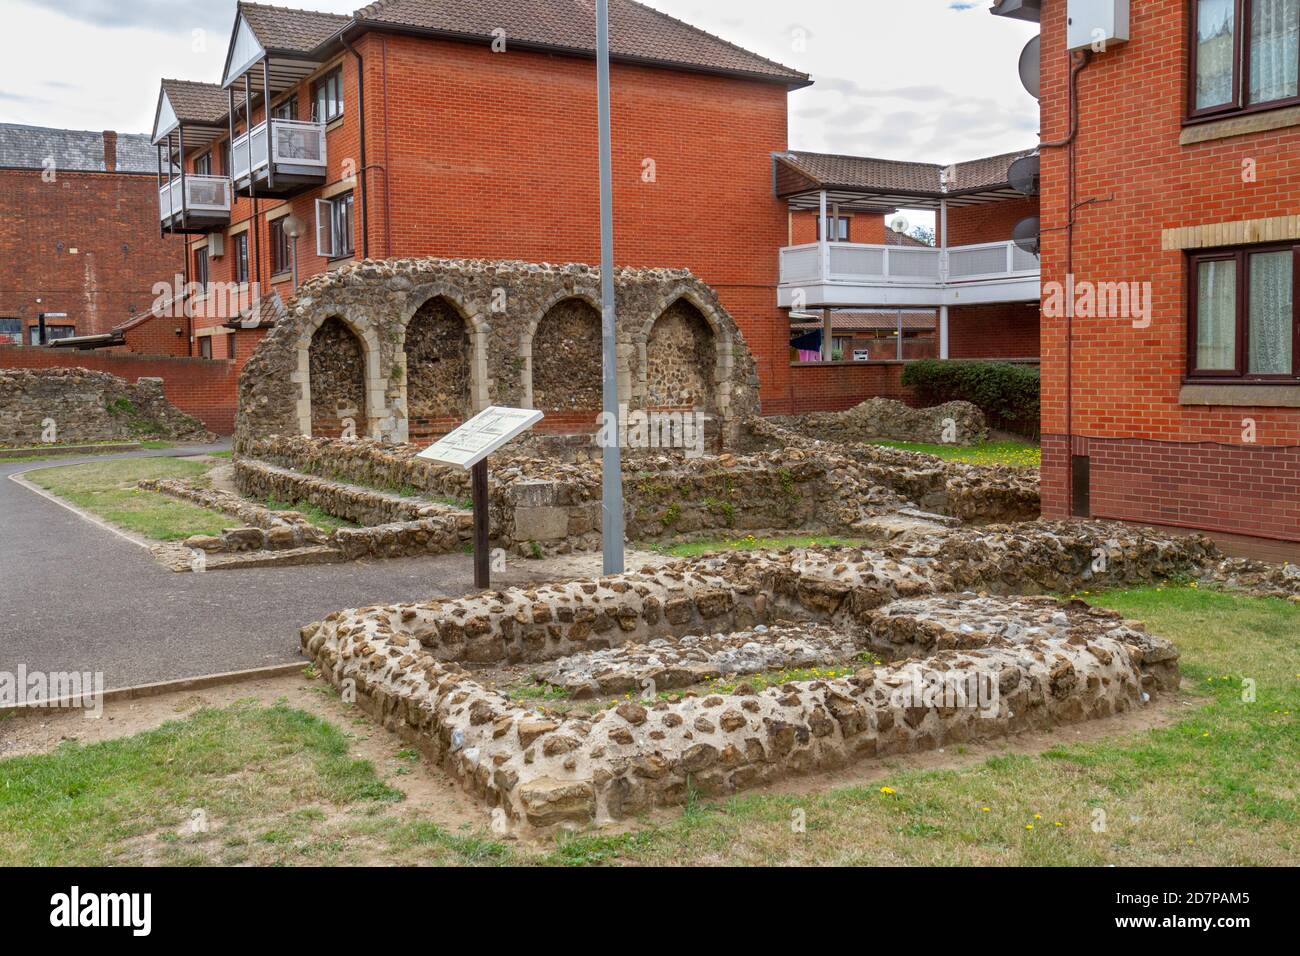 The preserved remains of Ipswich Blackfriars, a medieval religious house, Ipswich, Suffolk, UK. Stock Photo